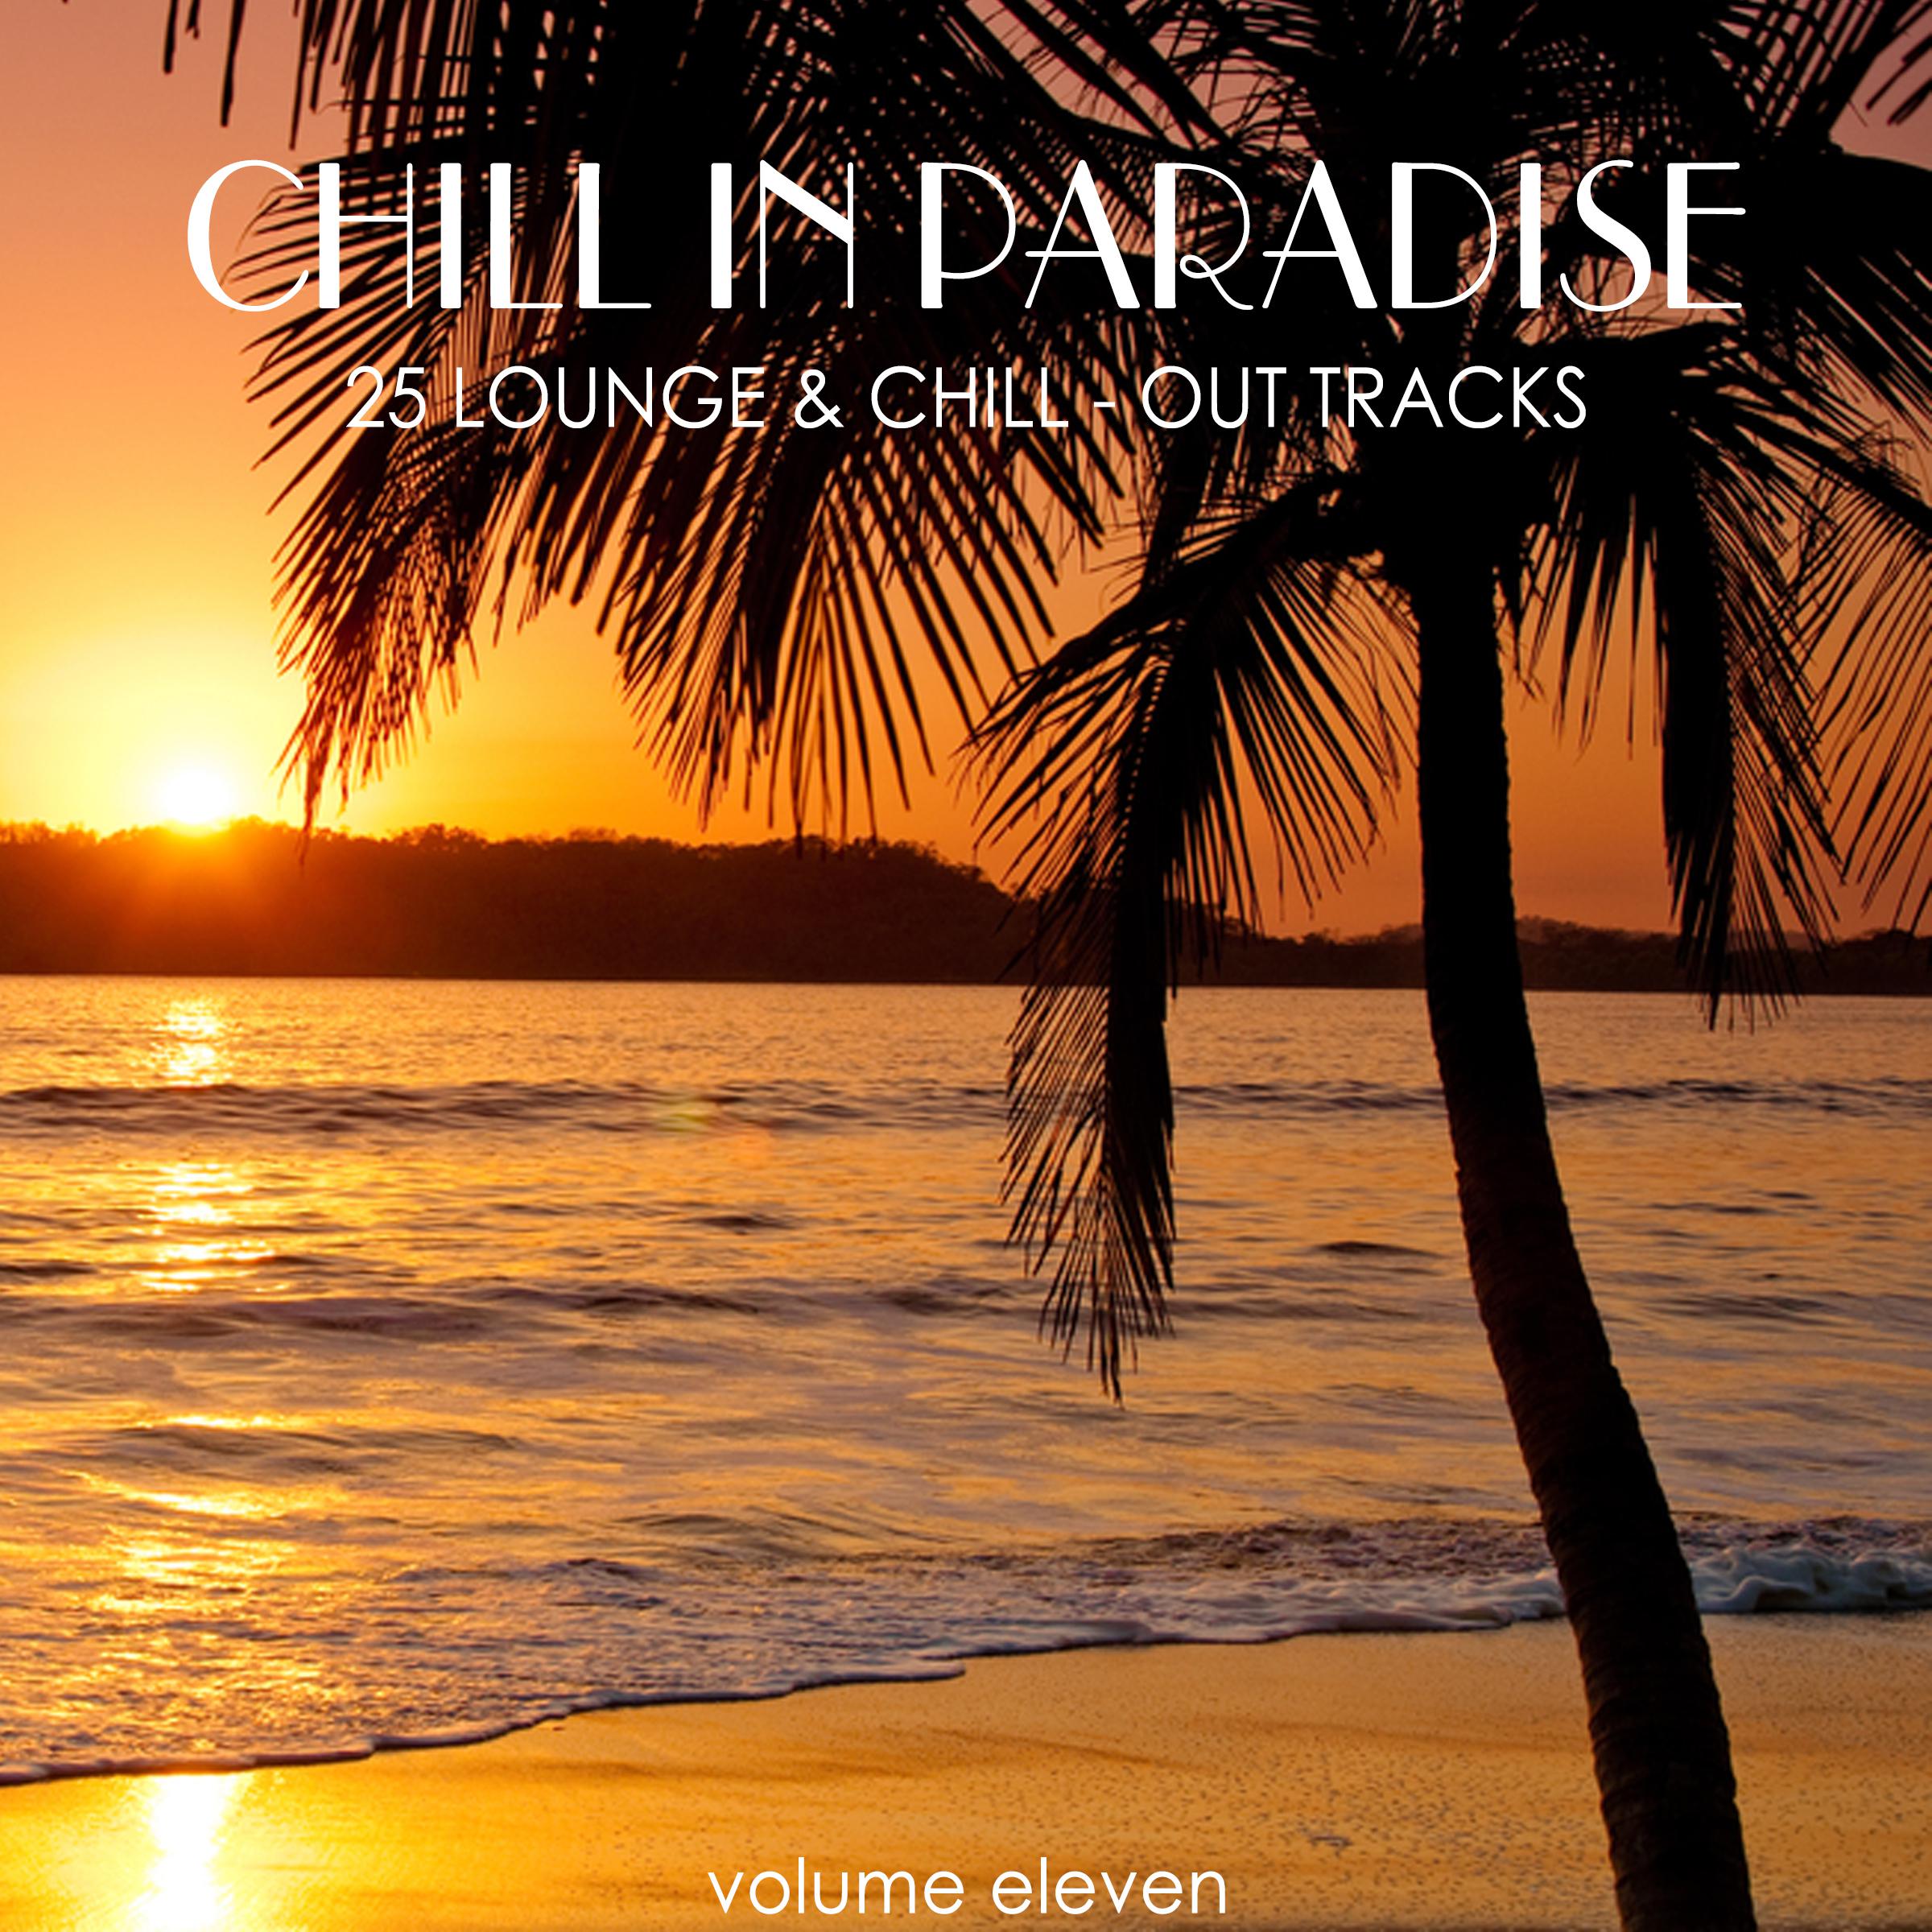 Chill in Paradise, Vol. 11 - 25 Lounge & Chill-Out Tracks